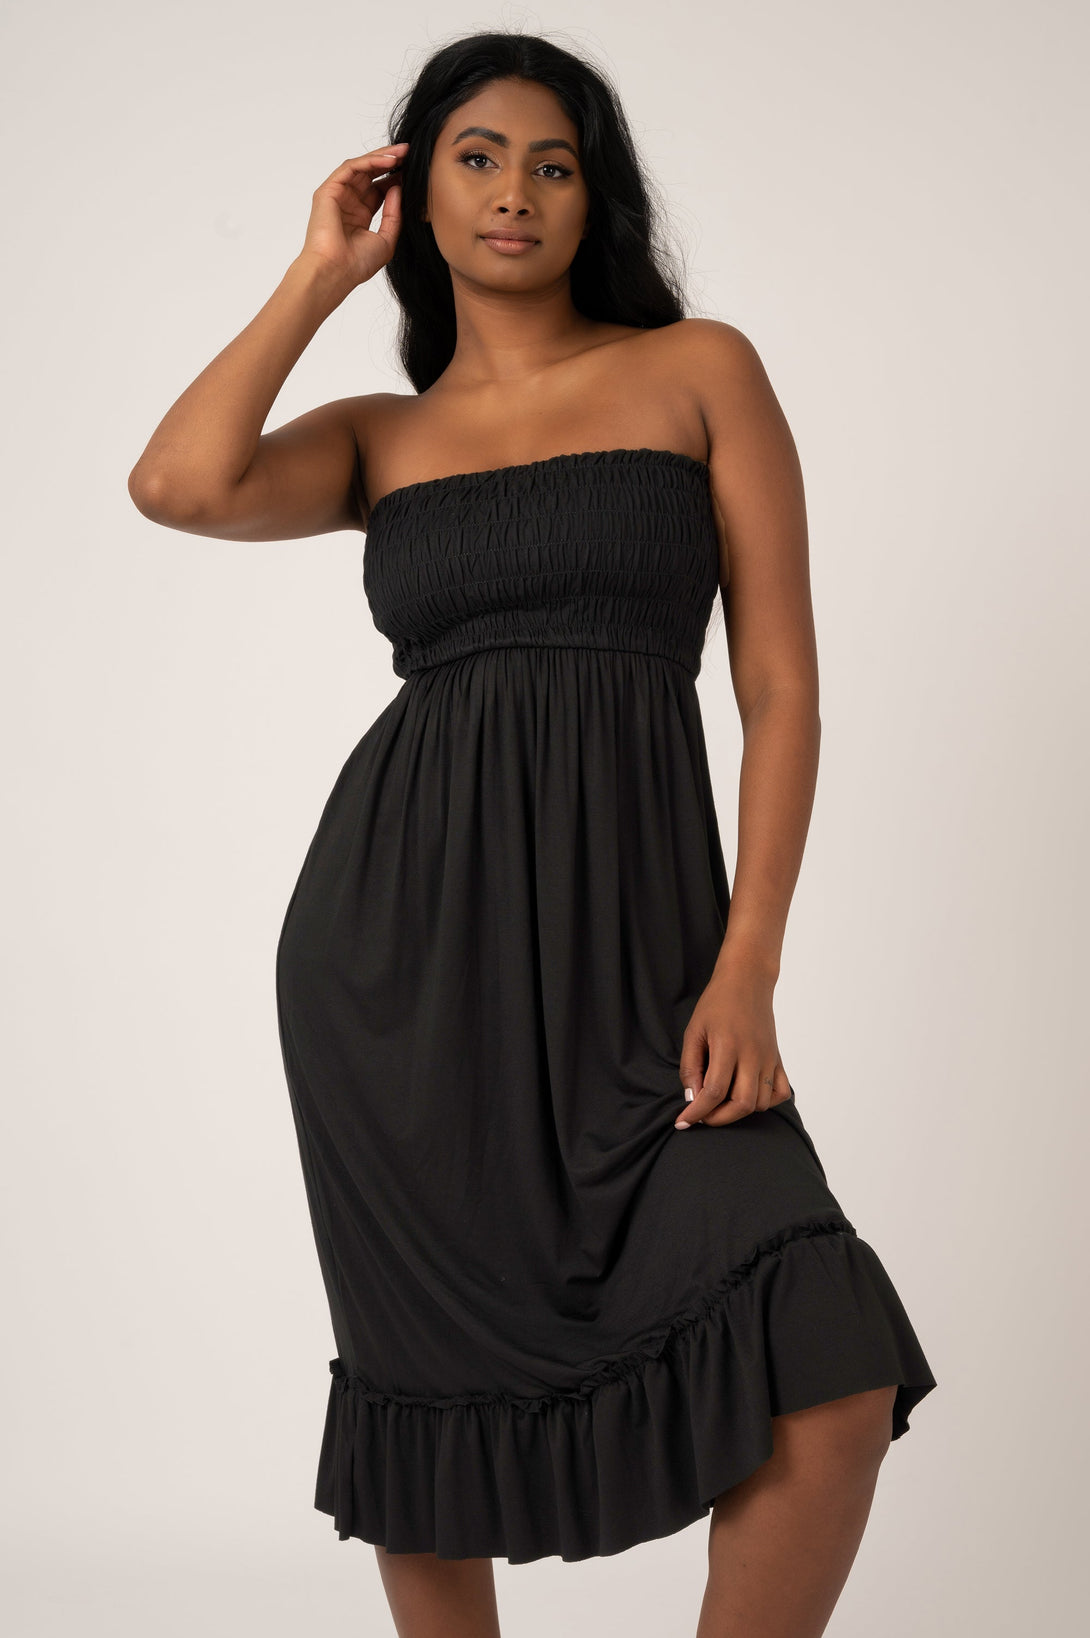 Black Slinky To Touch - Shirred Bandeau Midi Dress-Activewear-Exoticathletica